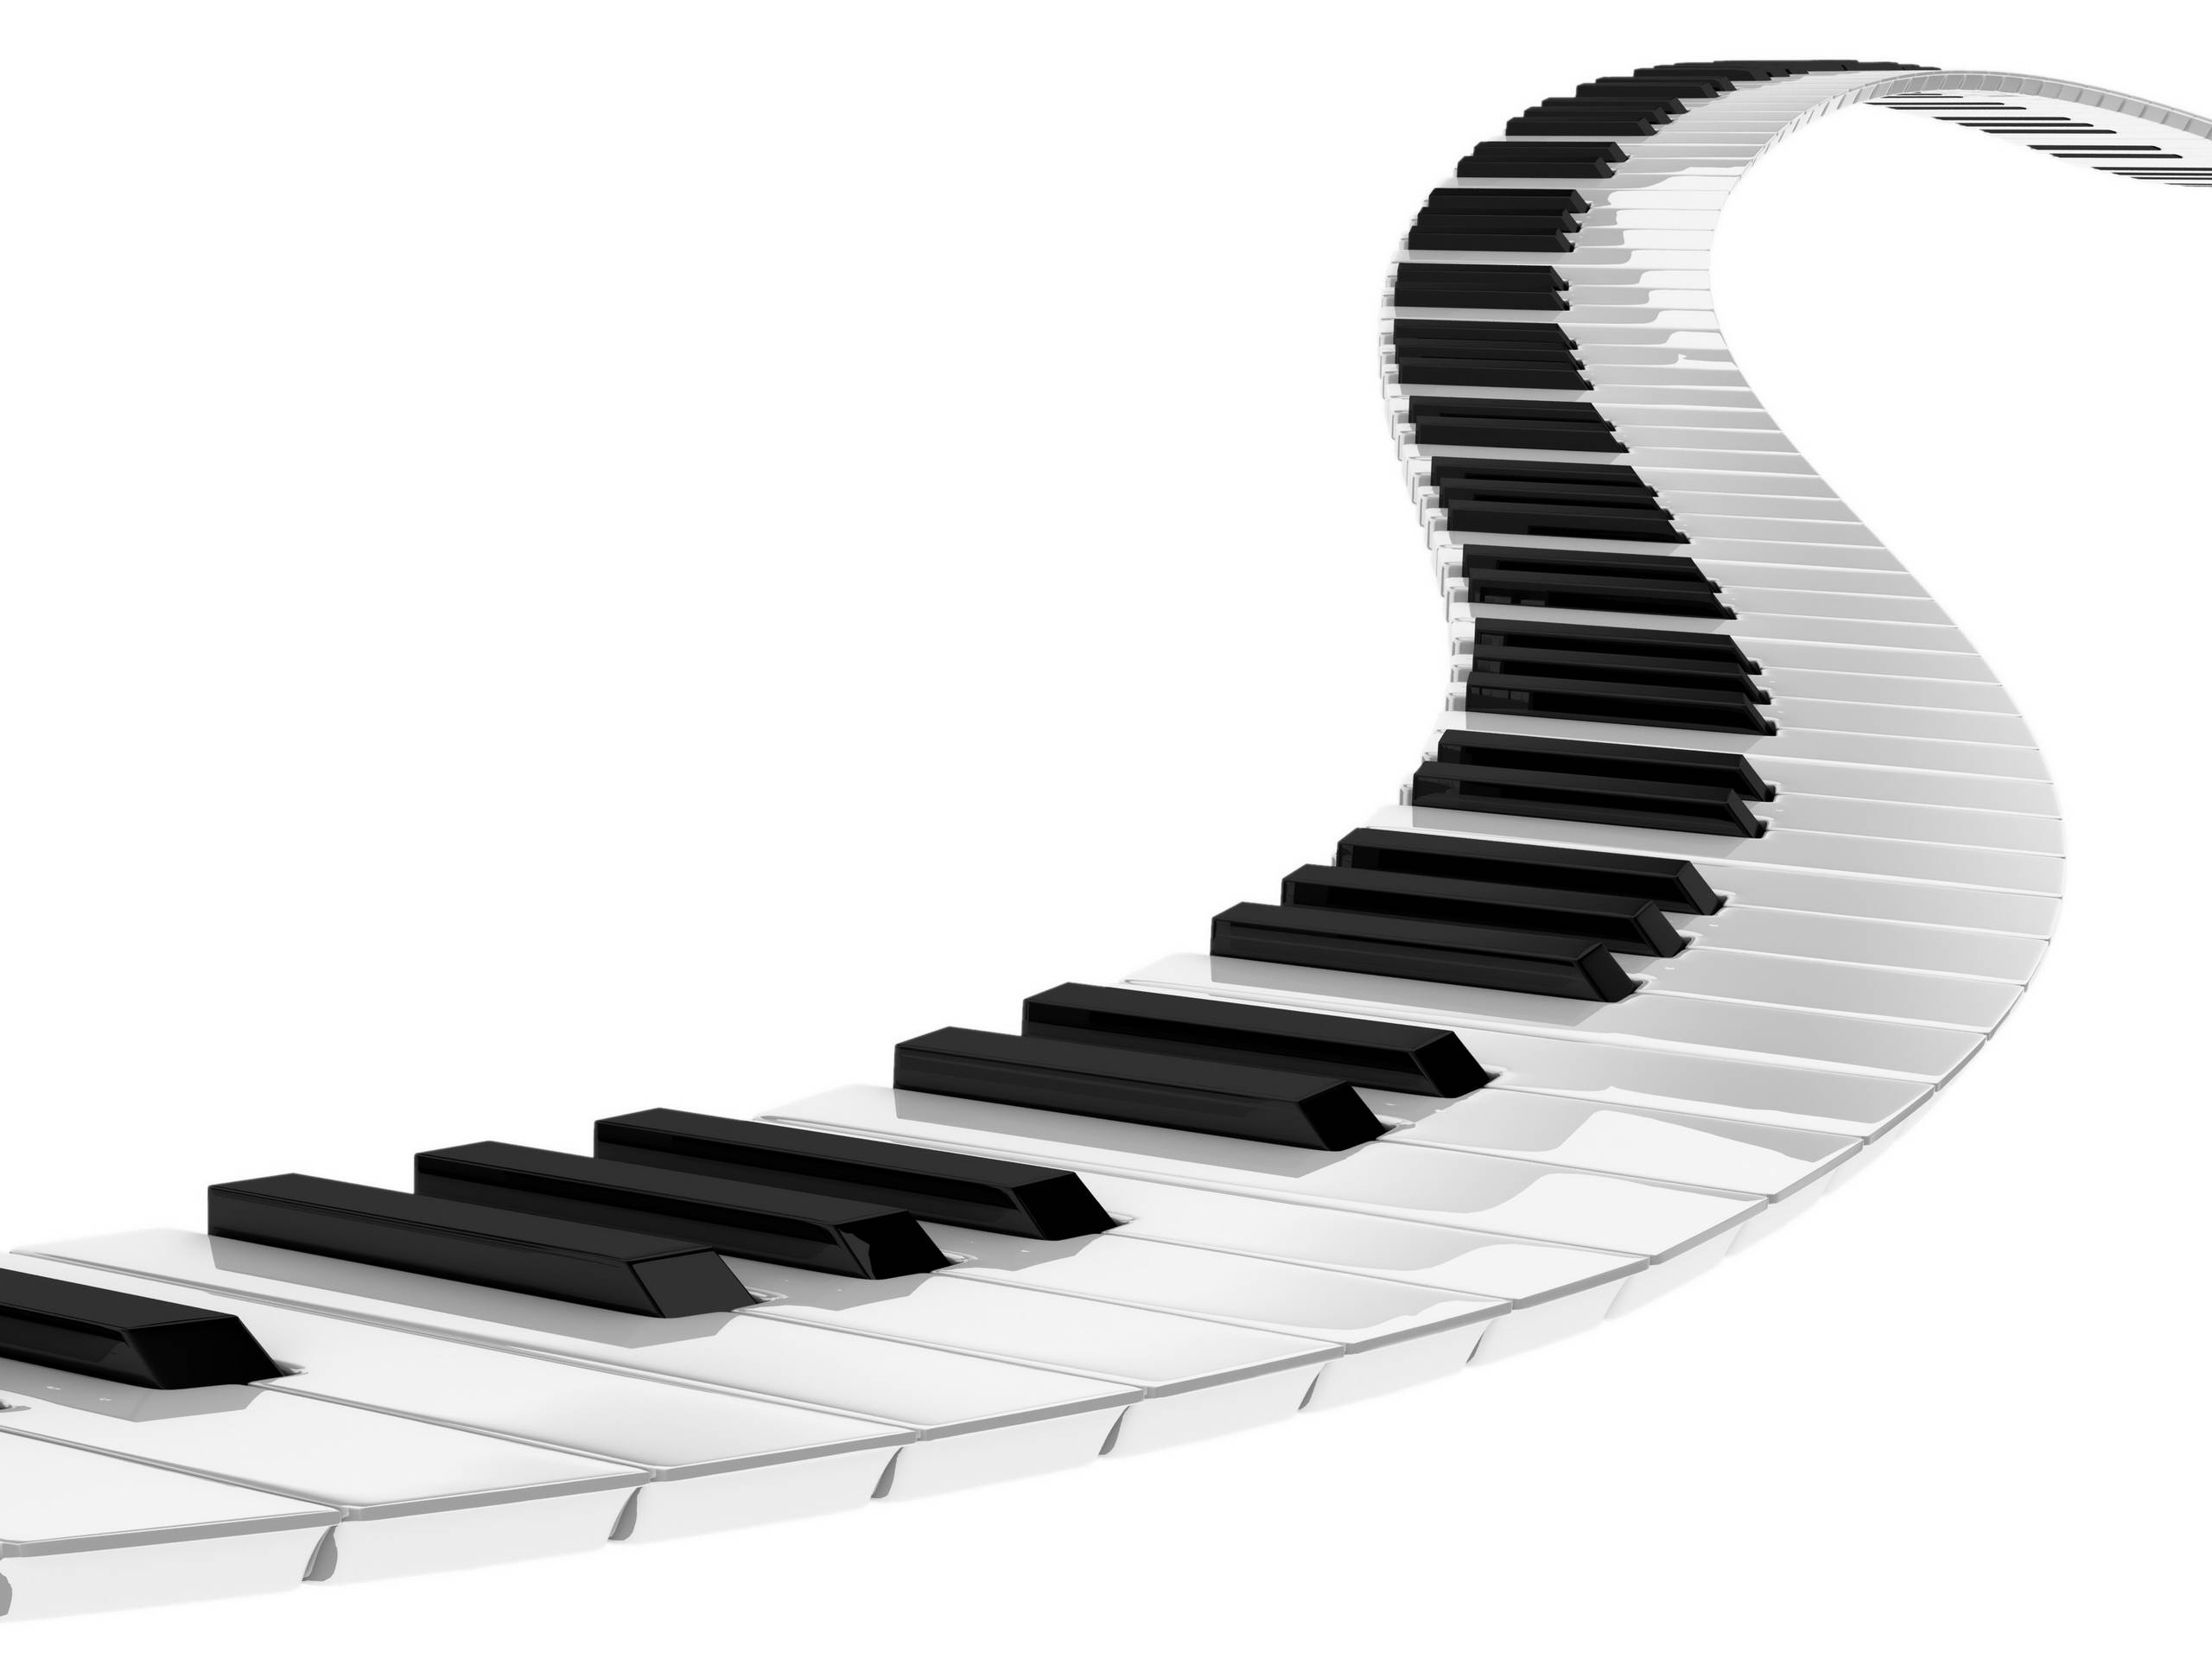 Pictures Of Musical Keyboards | Free Download Clip Art | Free Clip ...